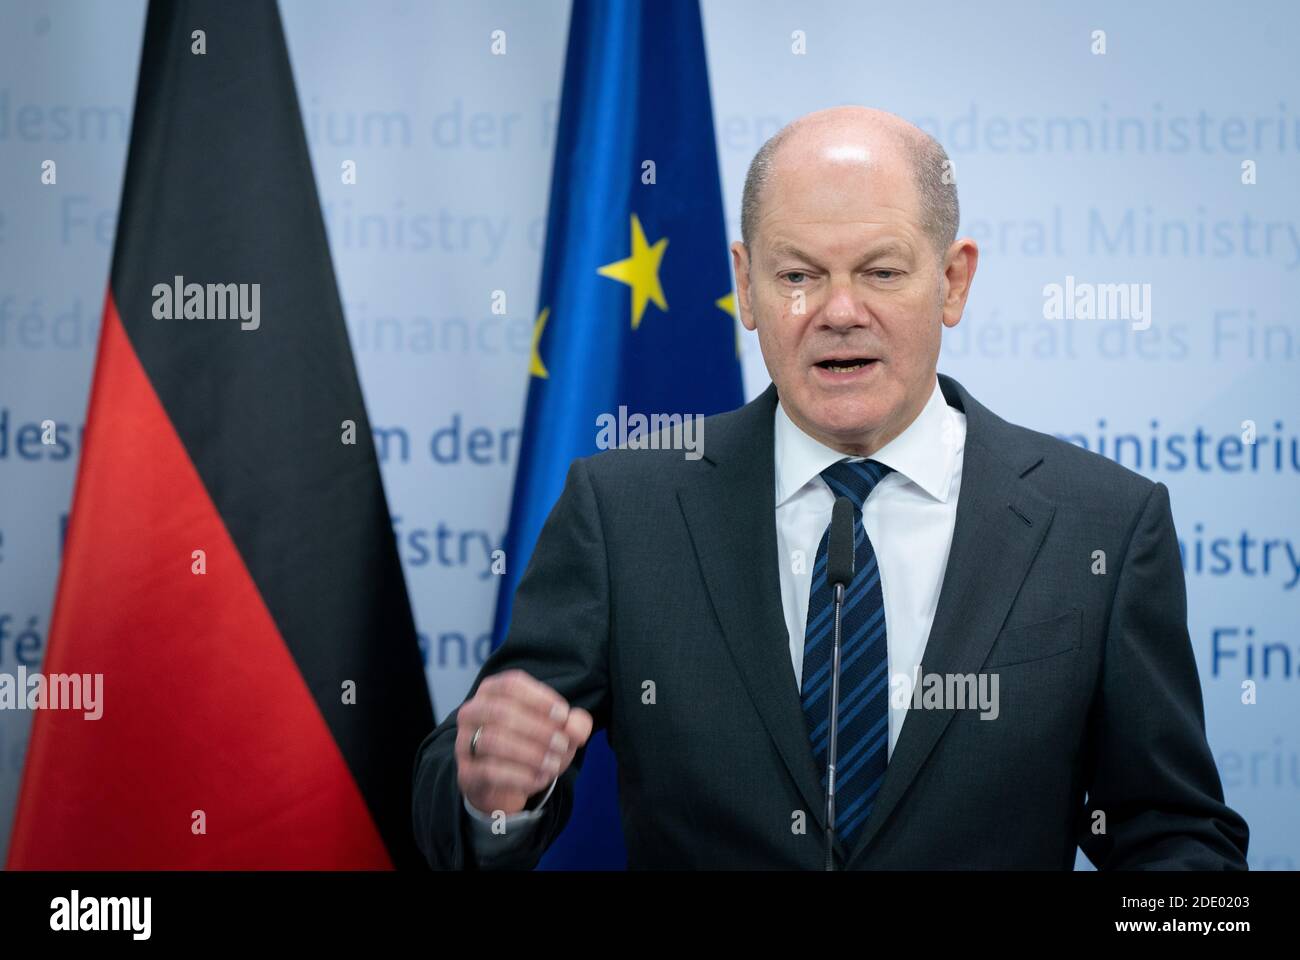 Berlin, Germany. 27th Nov, 2020. The Social Democratic candidate for the German chancellorship, the current vice-chancellor Olaf Scholz. Credit: Kay Nietfeld/dpa/Pool/dpa/Alamy Live News Stock Photo